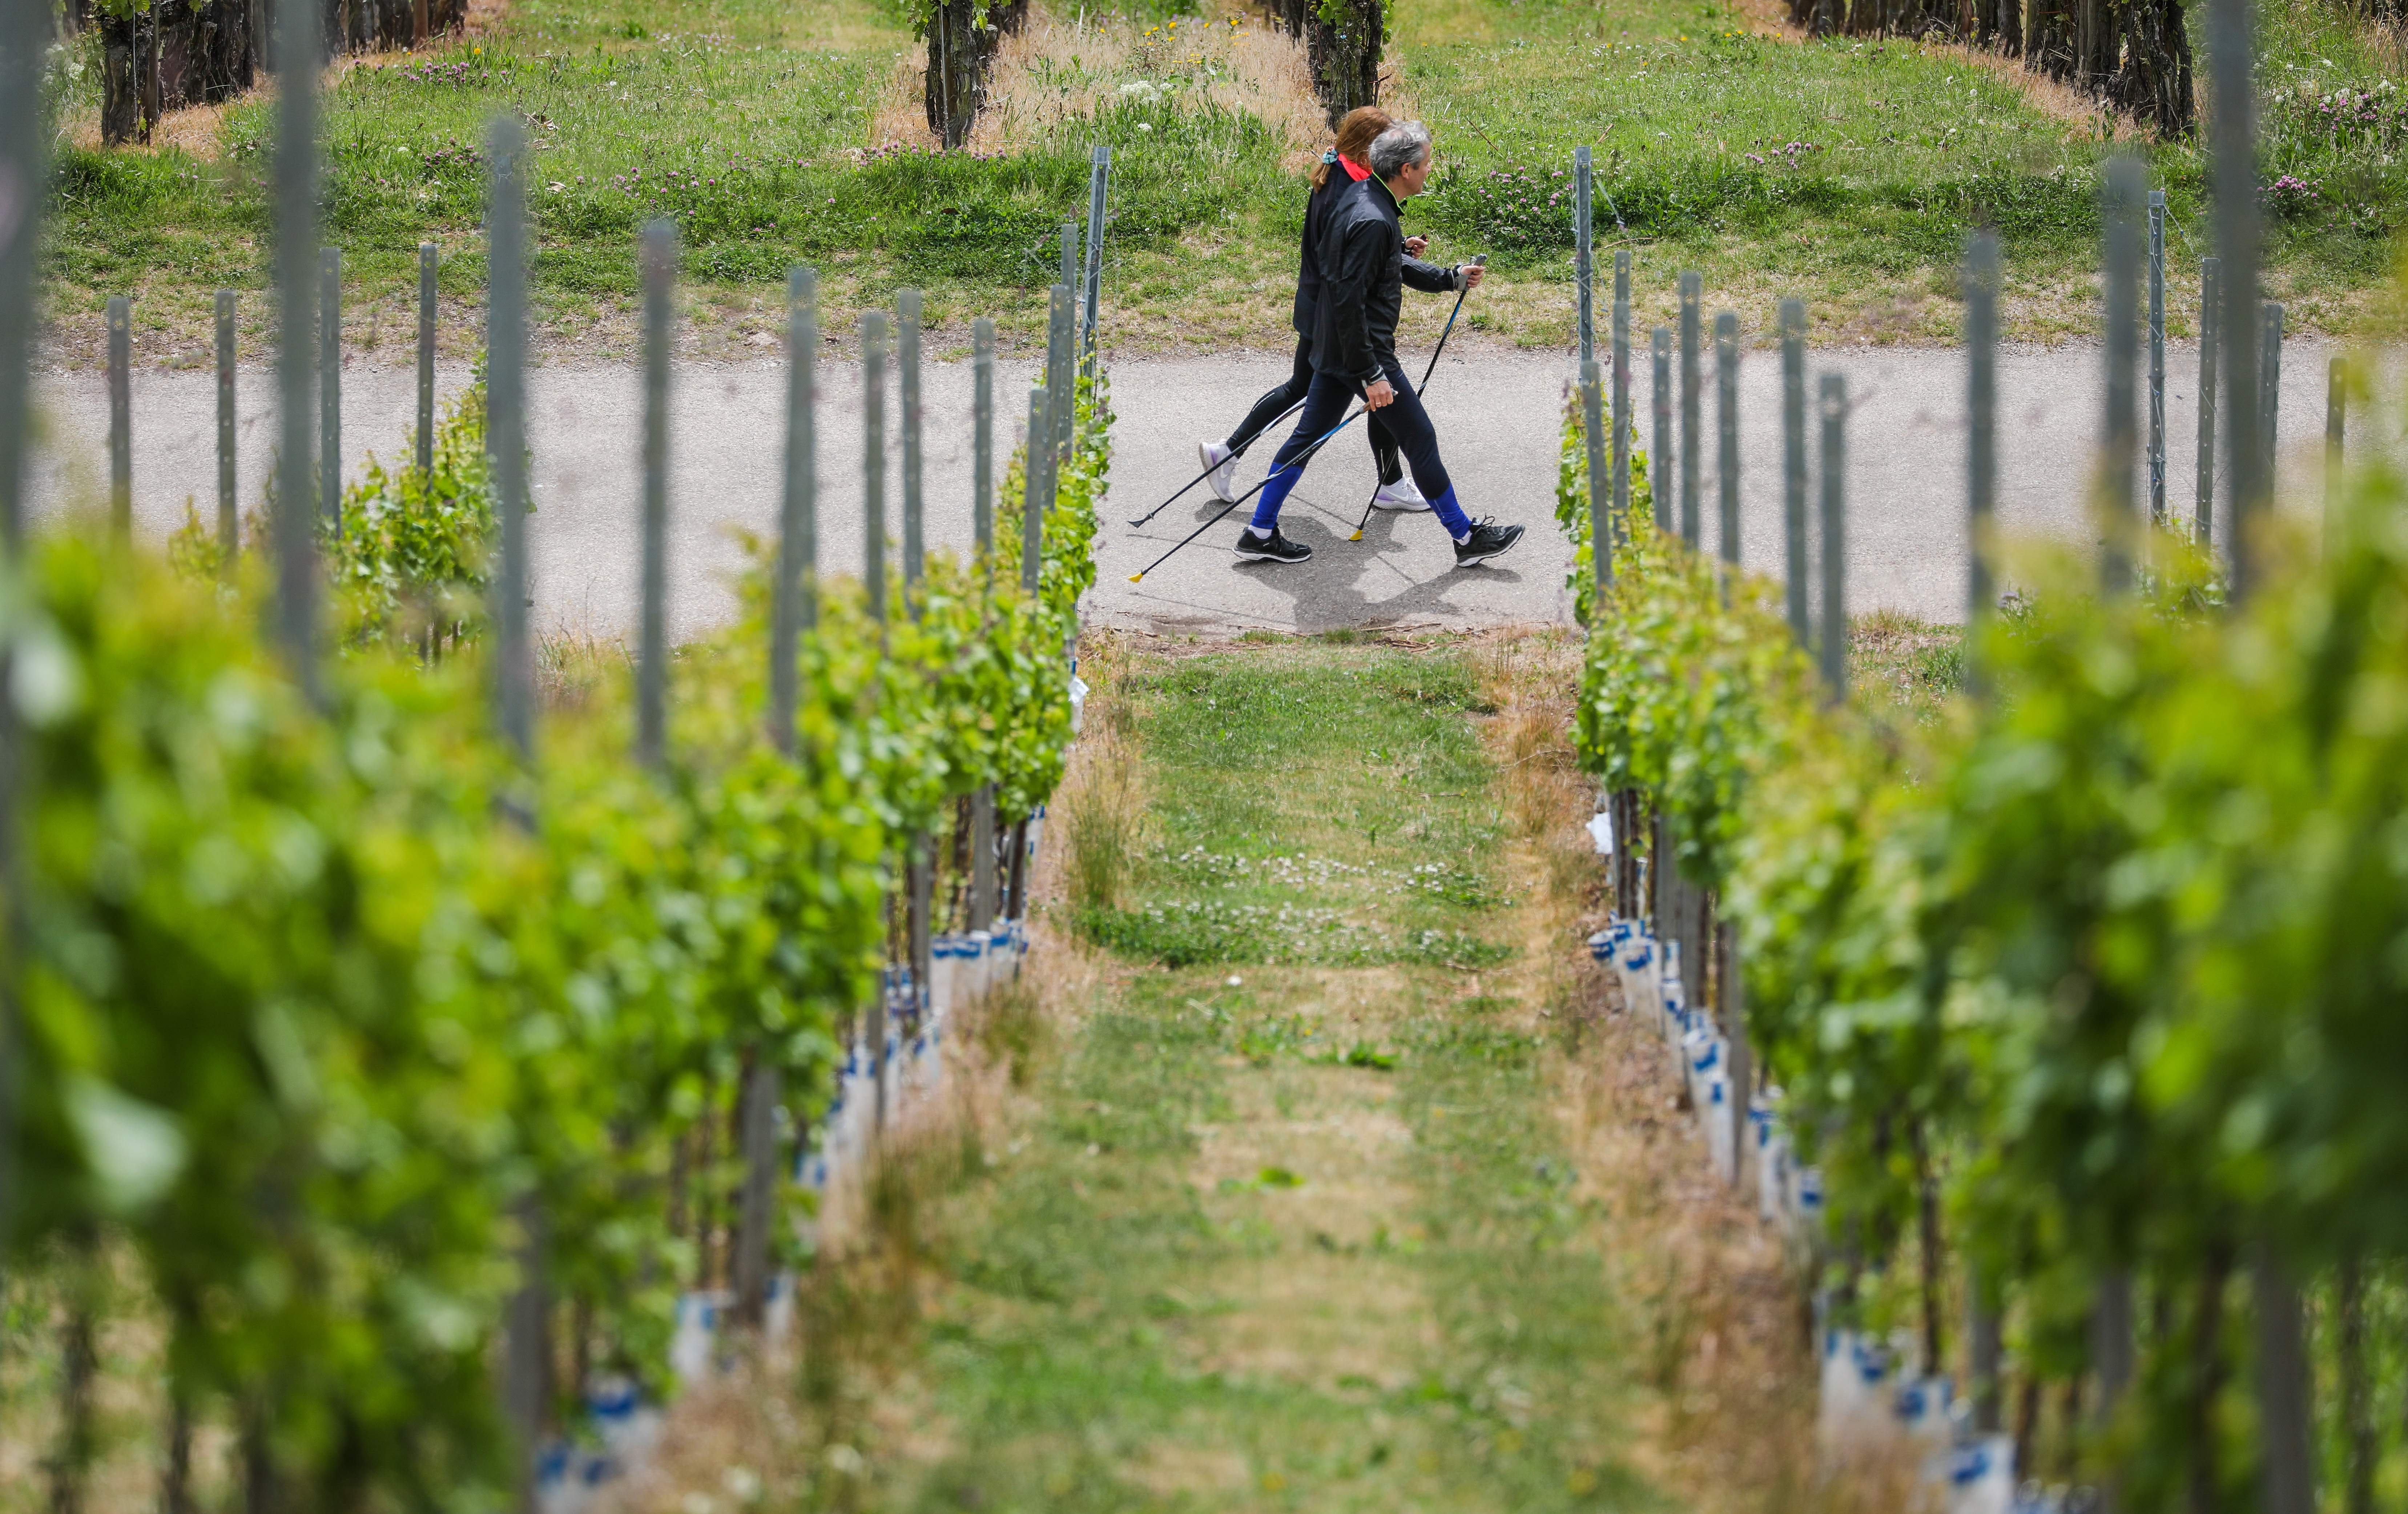 A view of a couple walking through a vineyard with walking sticks.